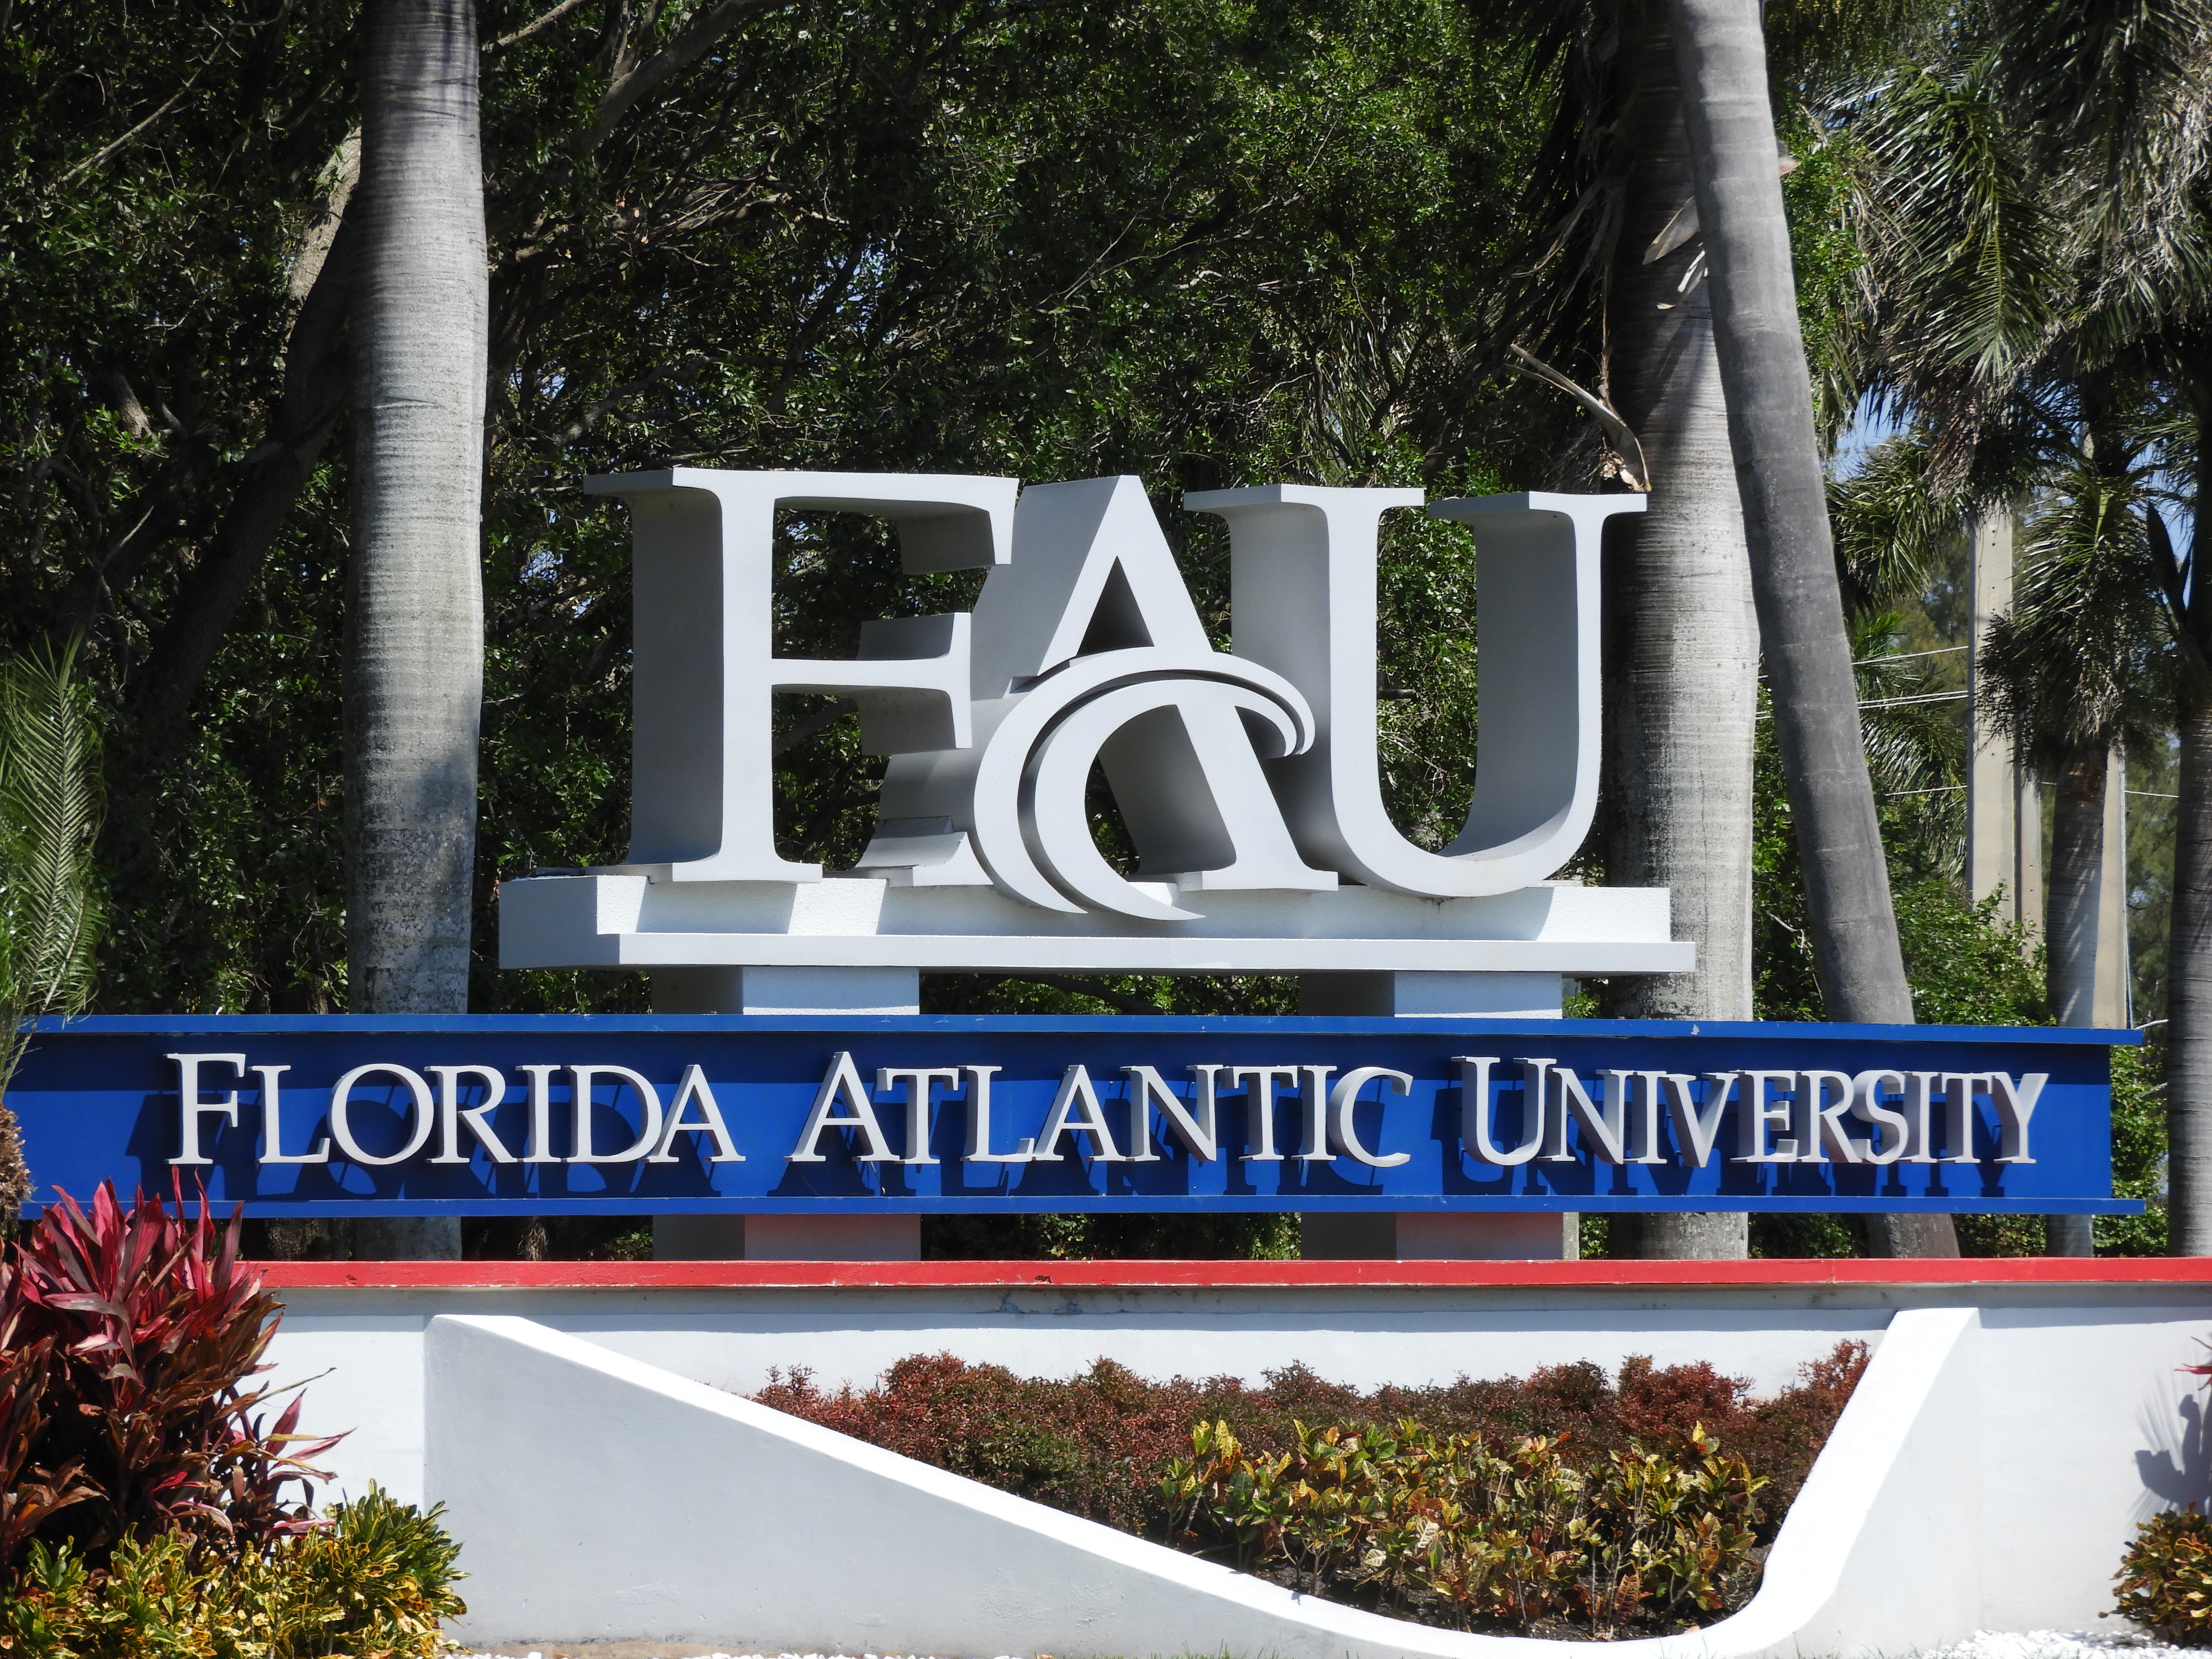 Sign on Campus of Florida Atlantic University in Boca Raton Florida (my vote for best looking college sign)